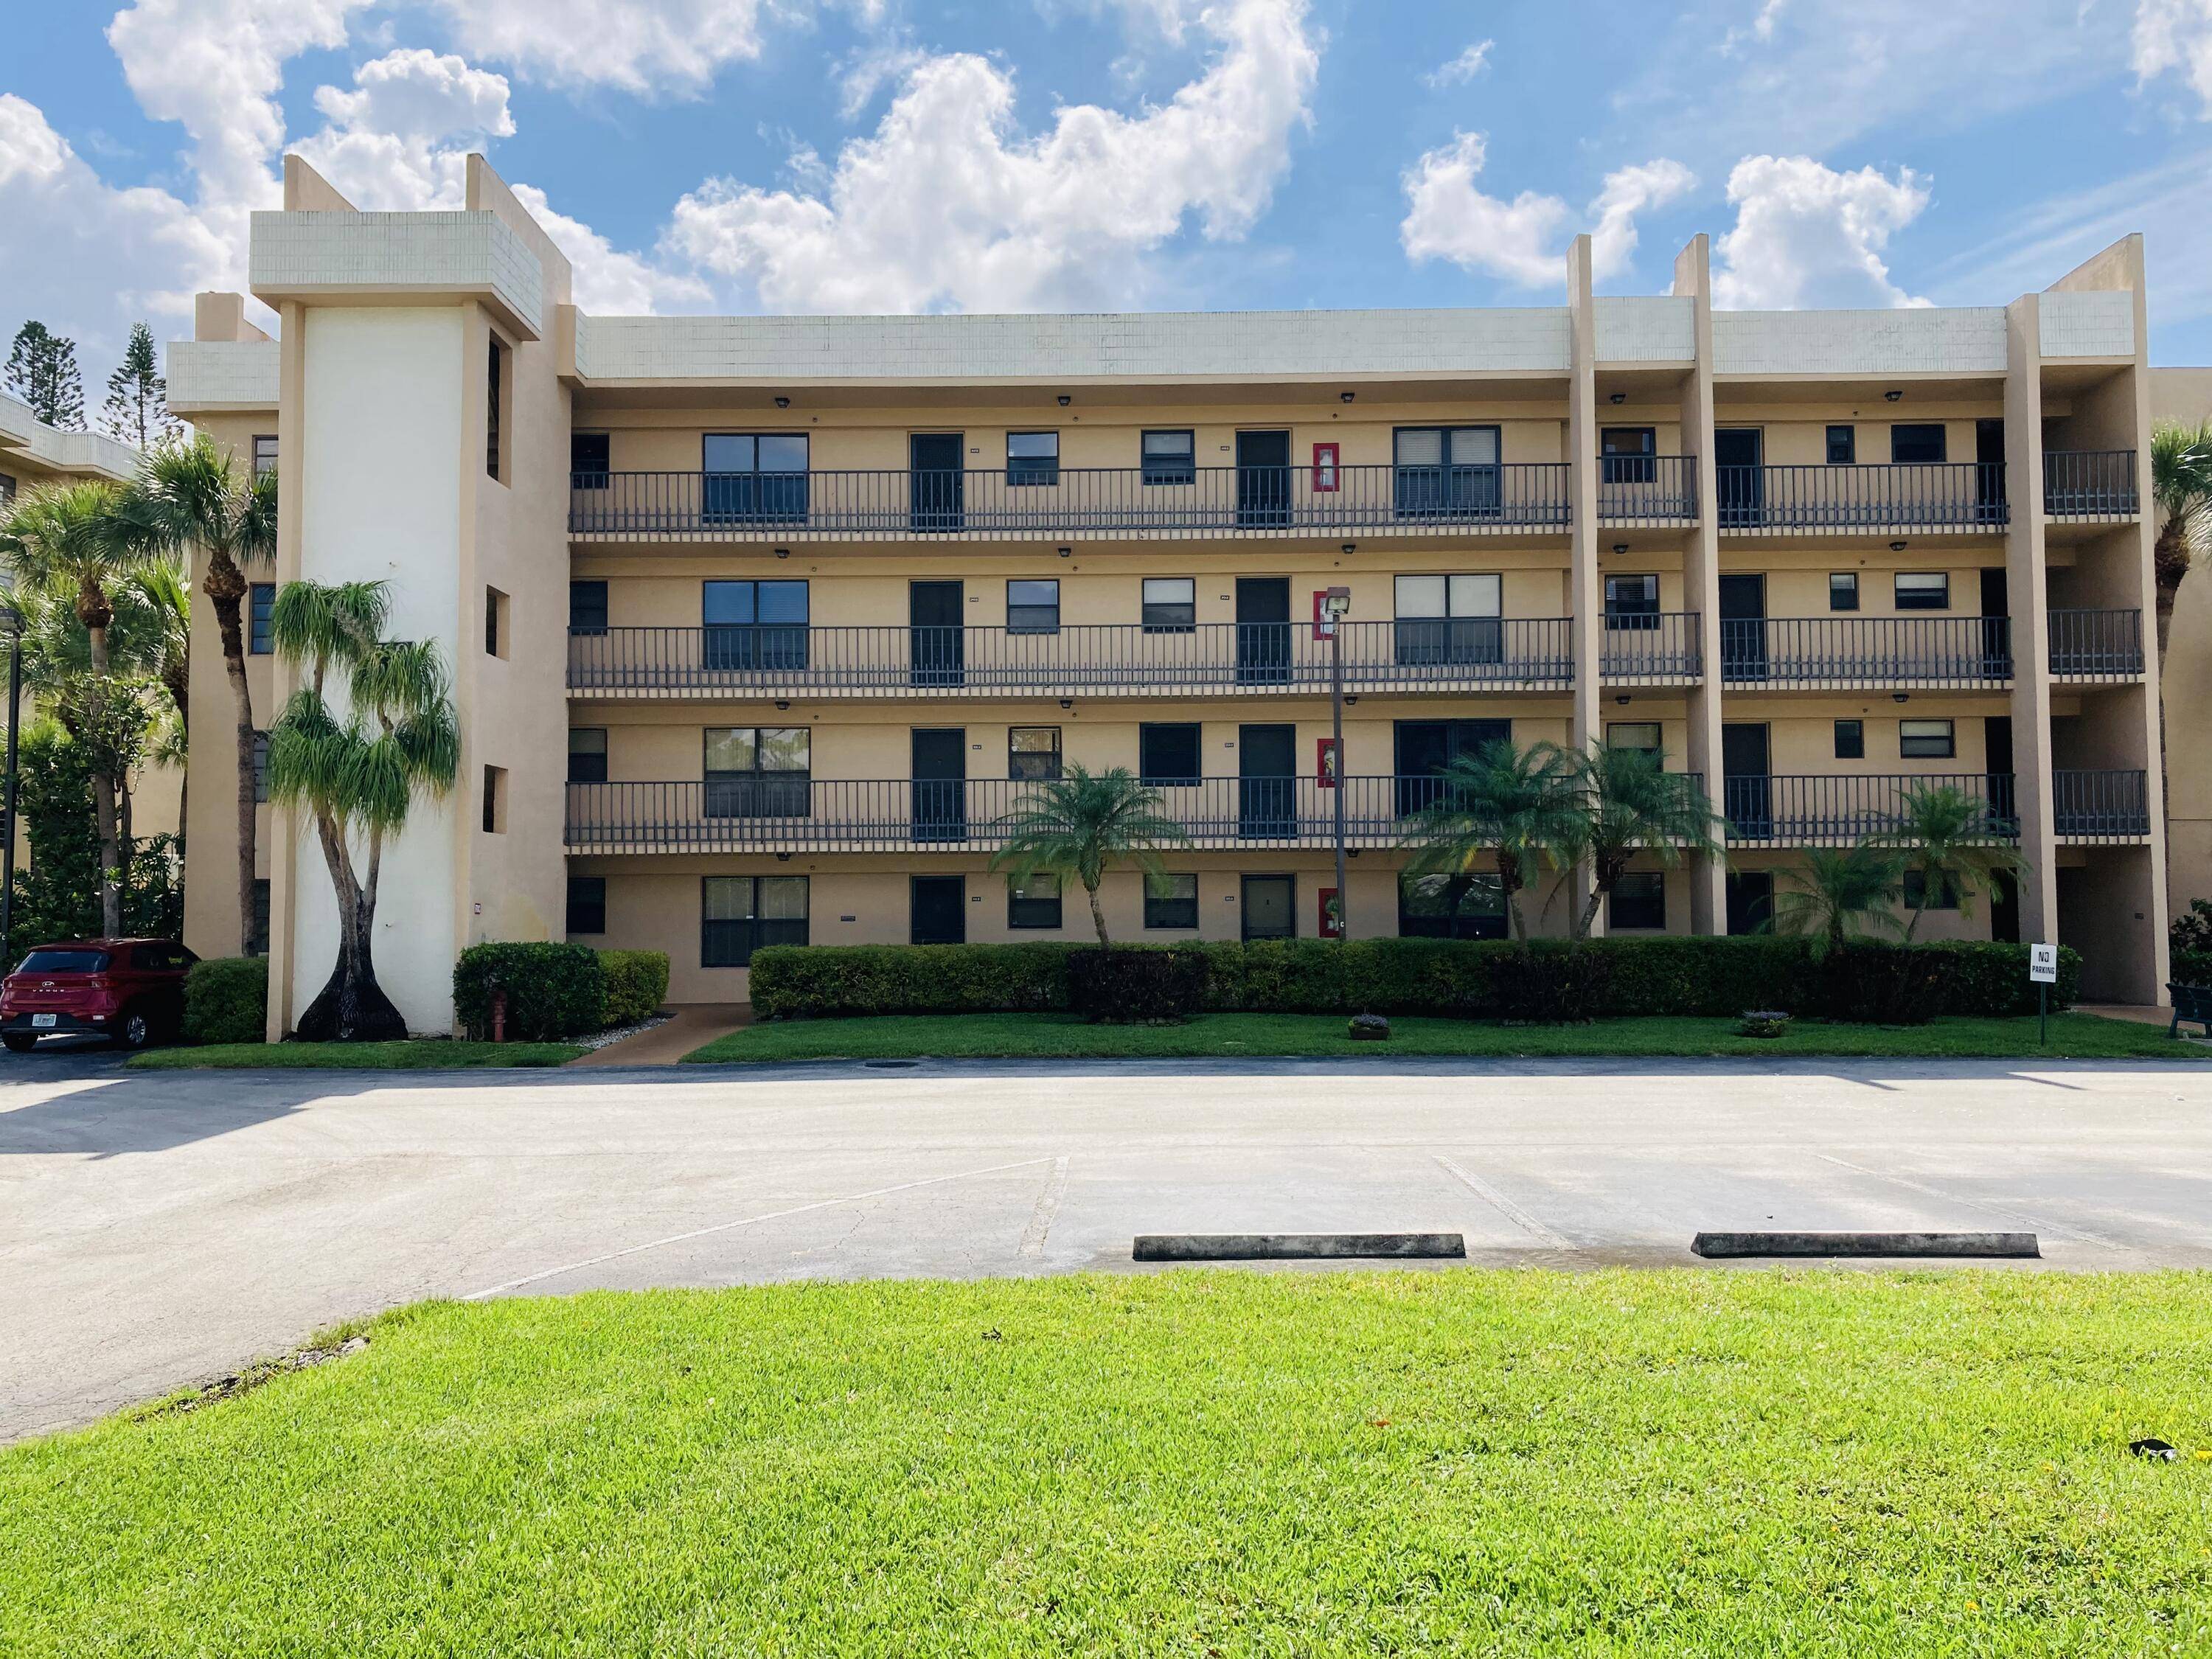 Discover tranquility in this 2Bed 2Bath corner unit condo in Lake Worth's desirable 55 community.